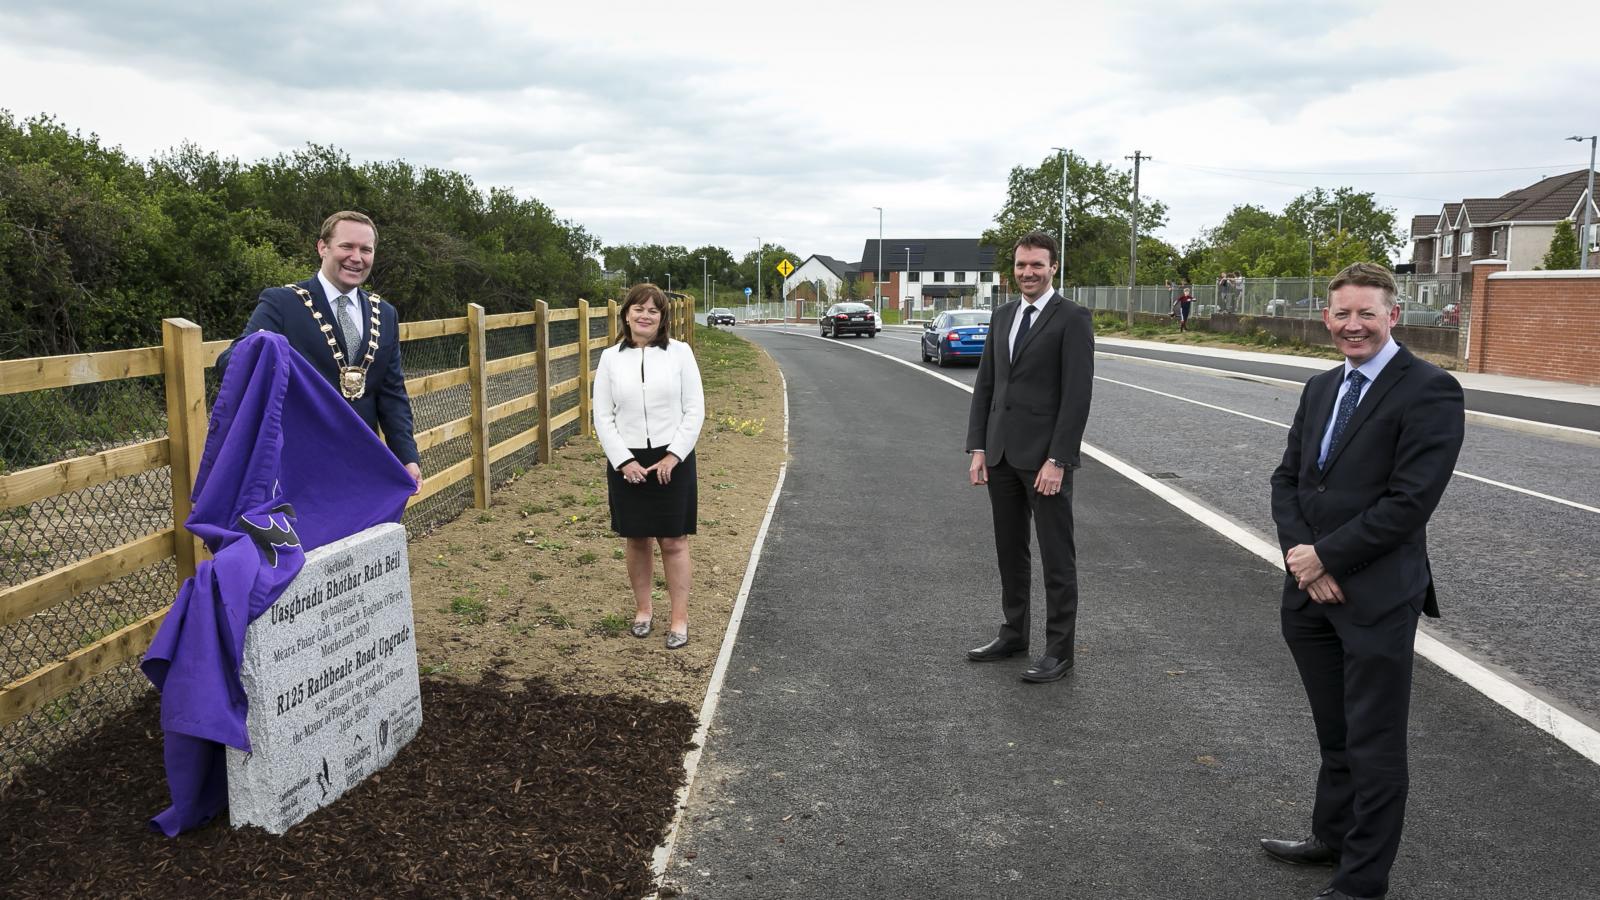 The Mayor of Fingal, Cllr Eoghan O’Brien (left), is pictured with Fingal County Council’s Chief Executive AnnMarie Farrelly, Senior Engineer Paul Carroll and Director of Planning and Strategic Infrastructure, Matthew McAleese (right) at the official opening of the Rathbeale Road Upgrade. 